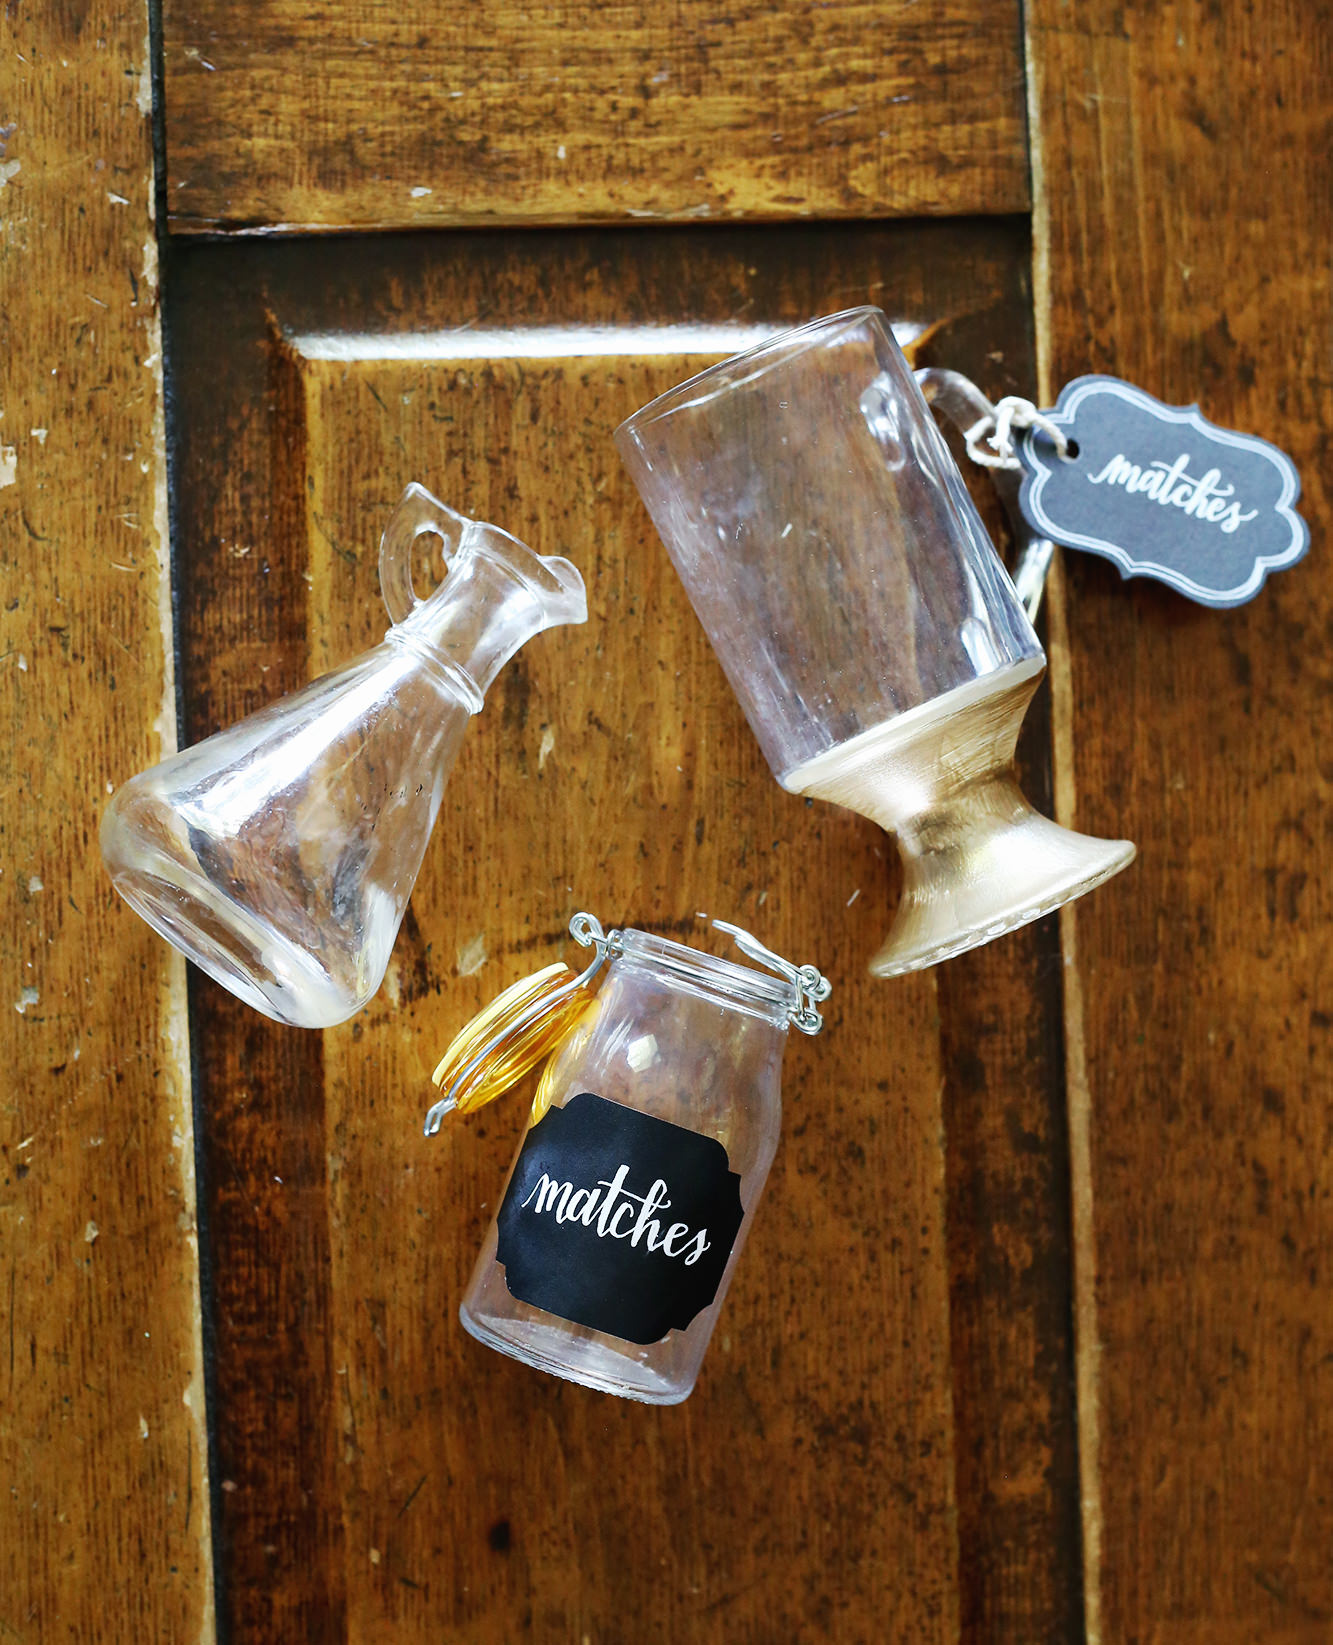 Recycle old glass jars and cups to create beautiful match containers! Via Lily & Val Living